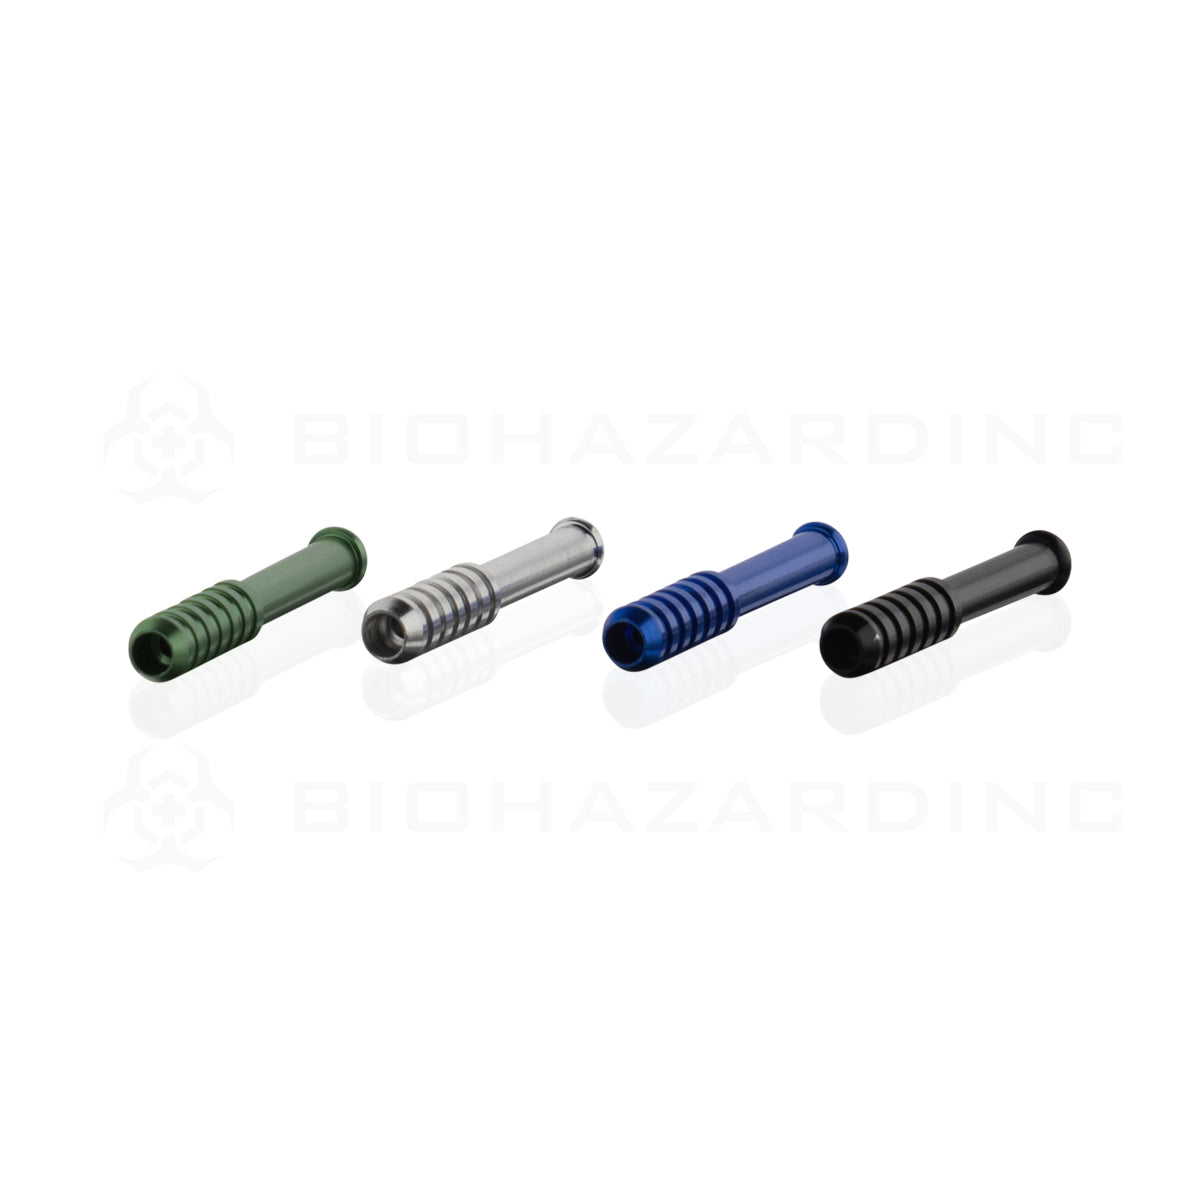 Chillum | Metal Bat One Hitter Hand Pipes | 2" - Assorted Colors - 12 Count Metal Hand Pipe Biohazard Inc   